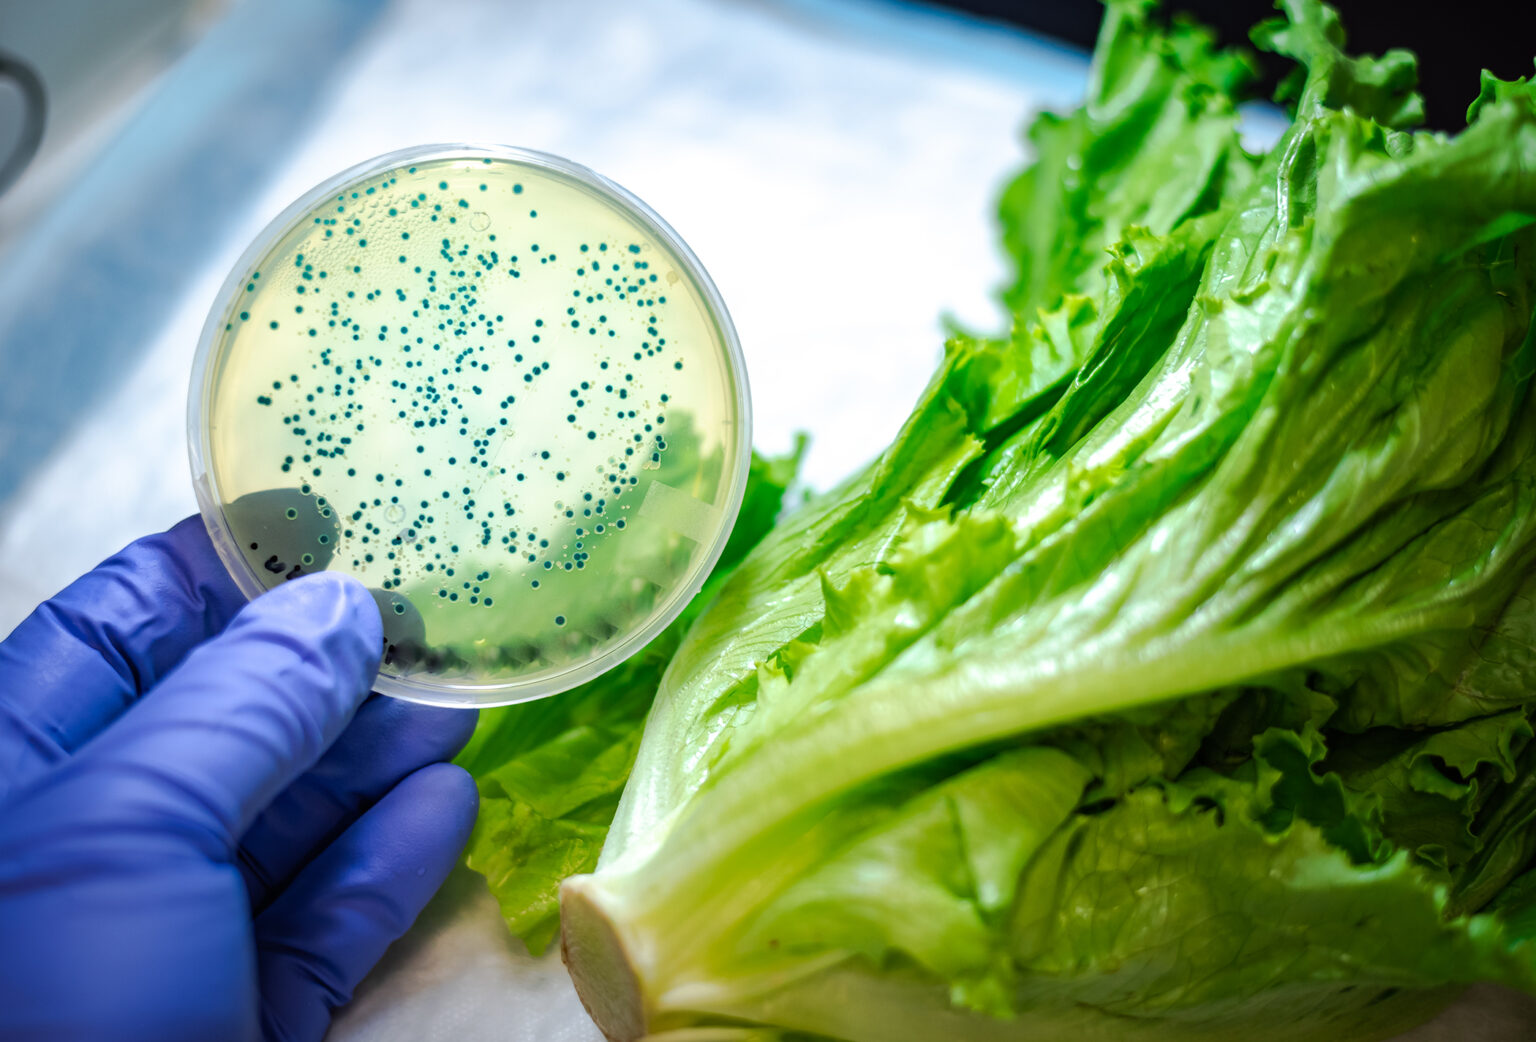 Researchers in the University of Georgia College of Engineering are developing a new way to detect potentially deadly Listeria contamination in food.